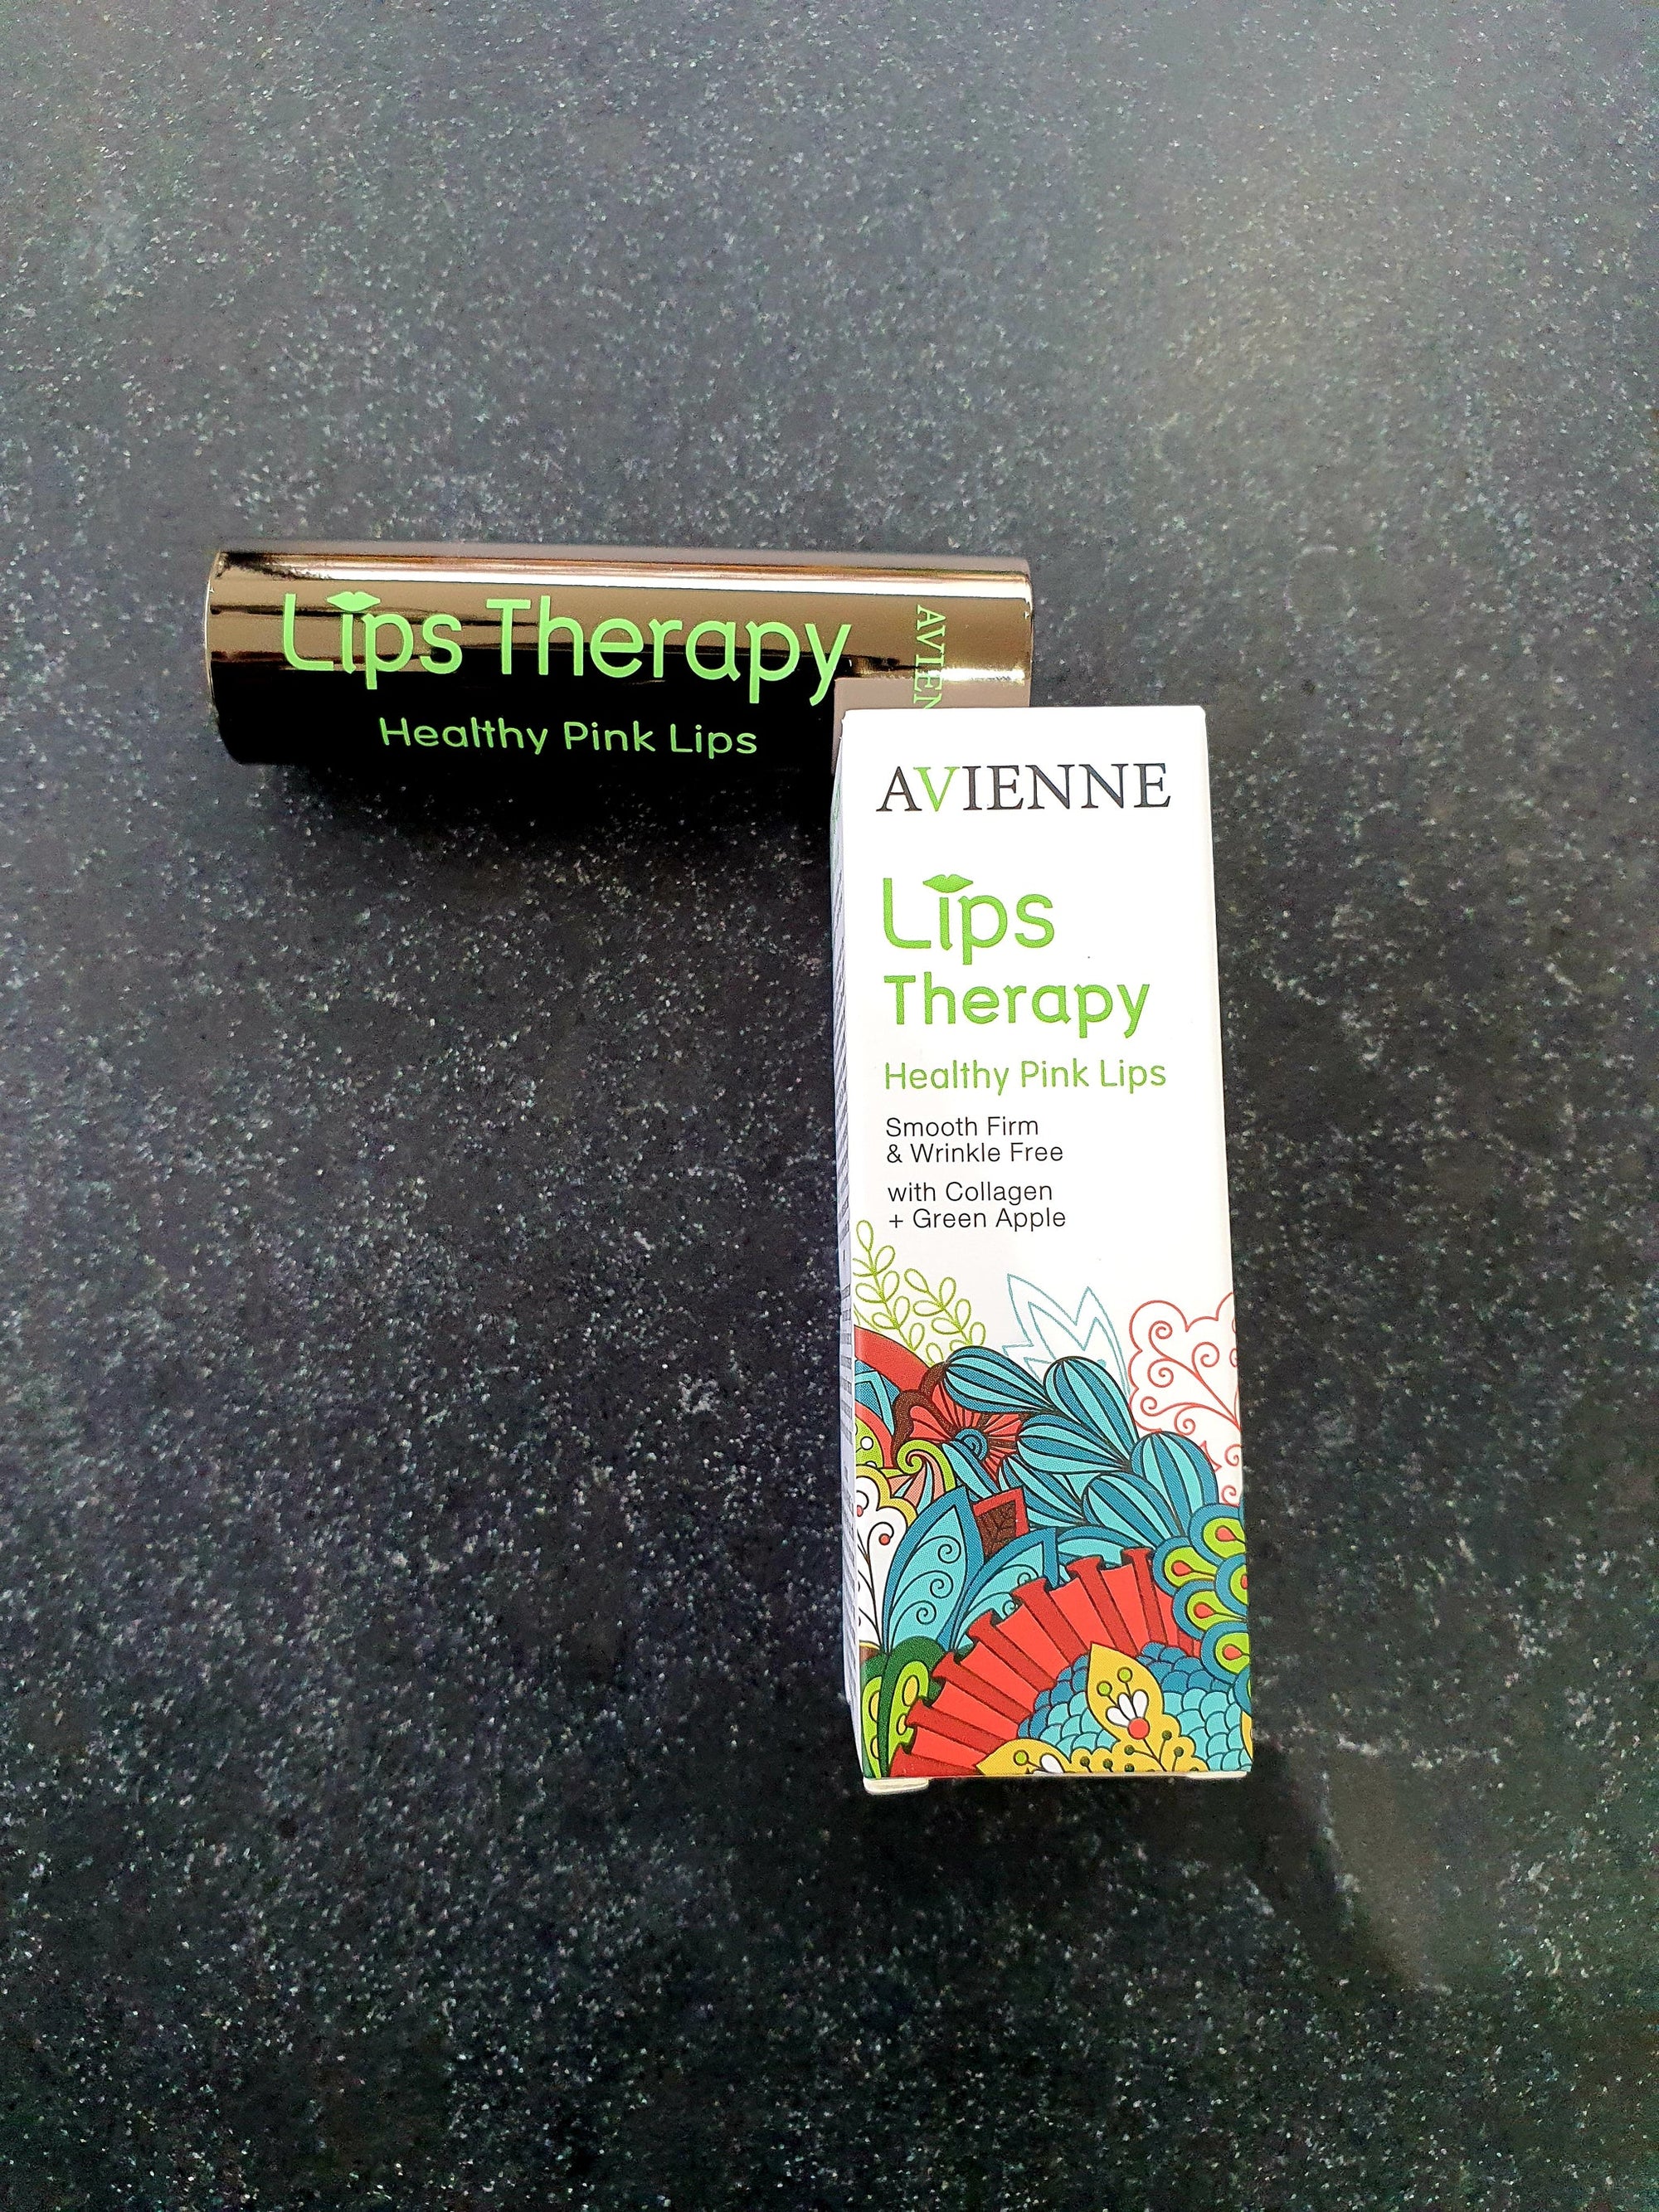 Avienne Lips Therapy